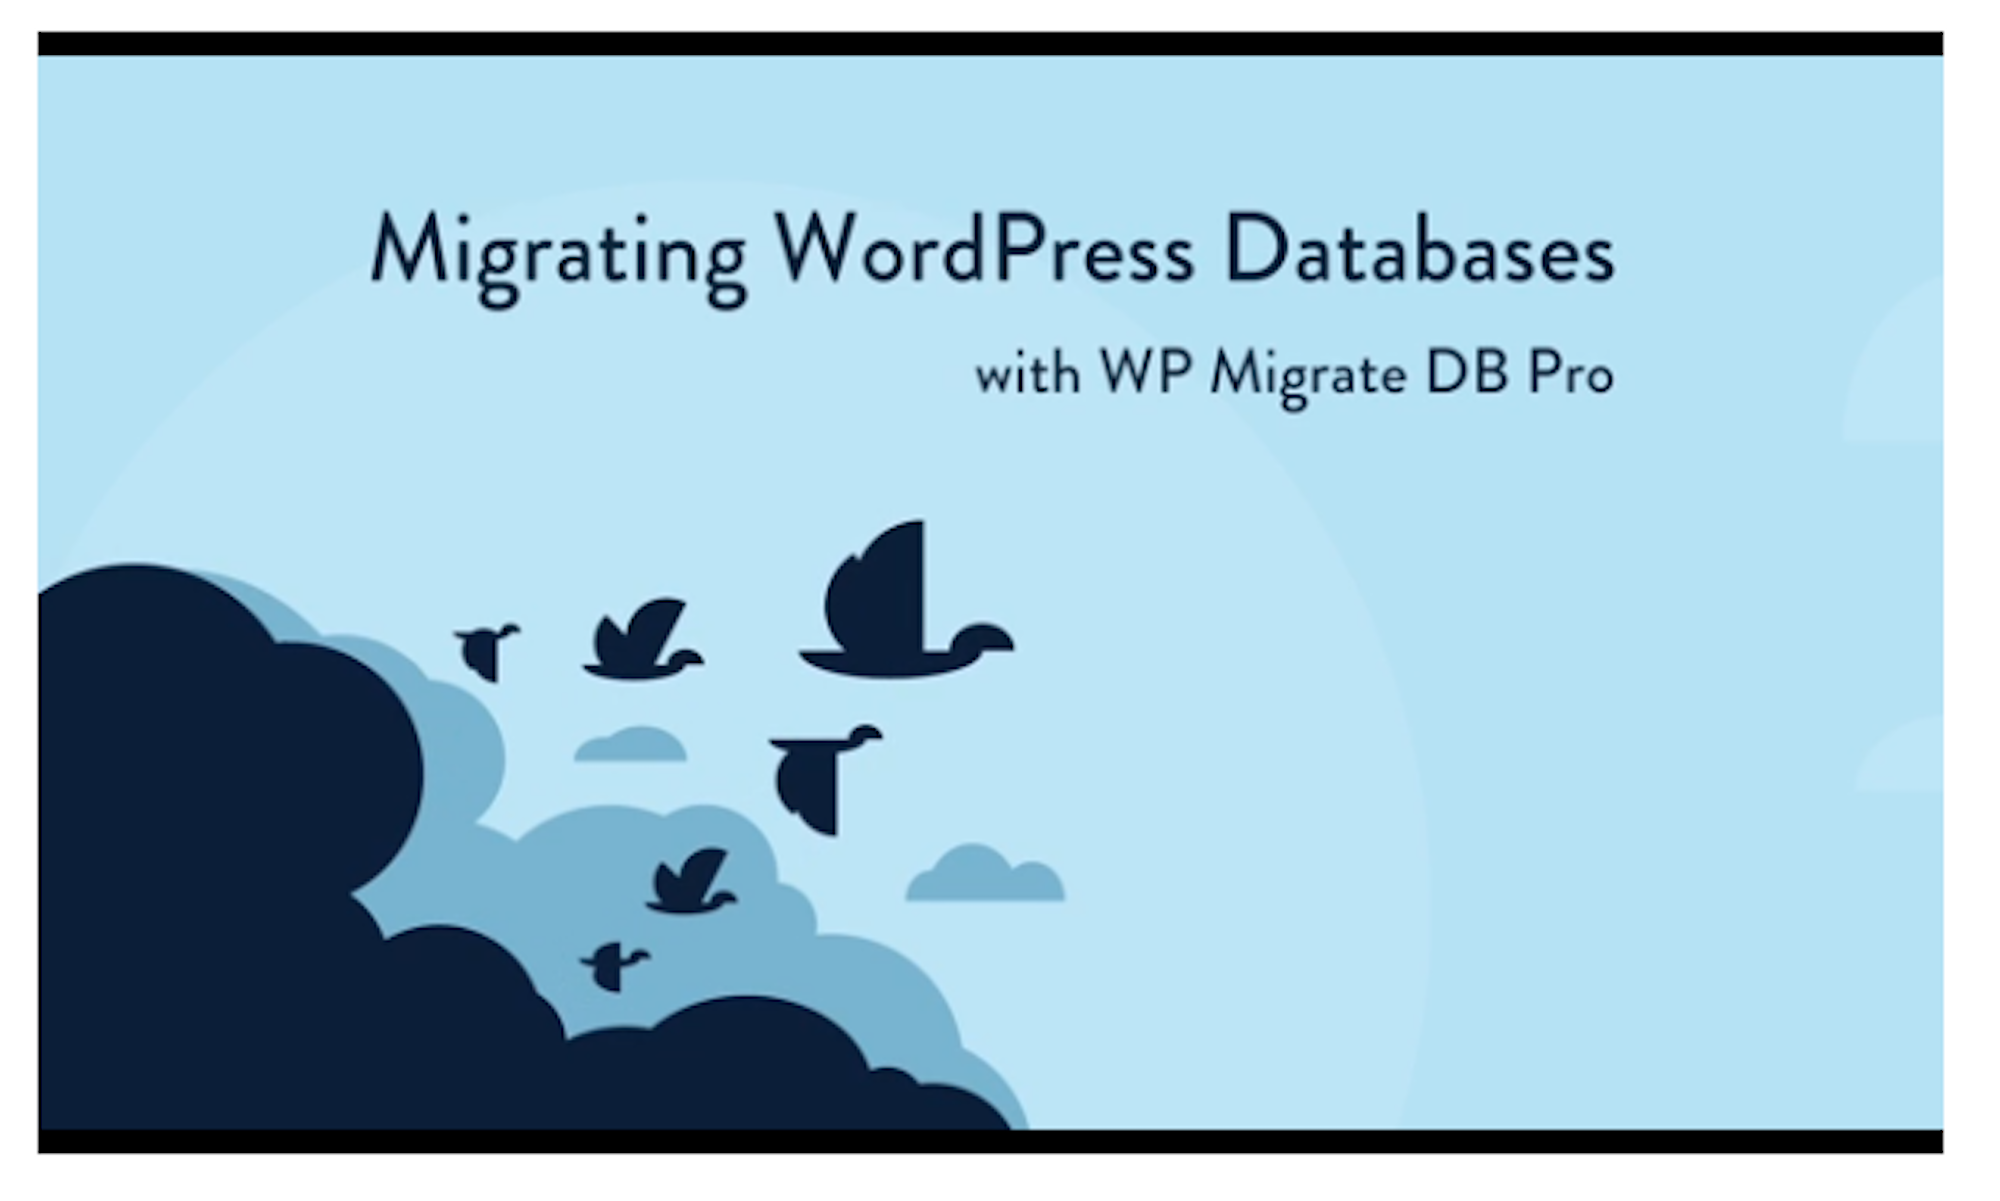 WP Migrate DB